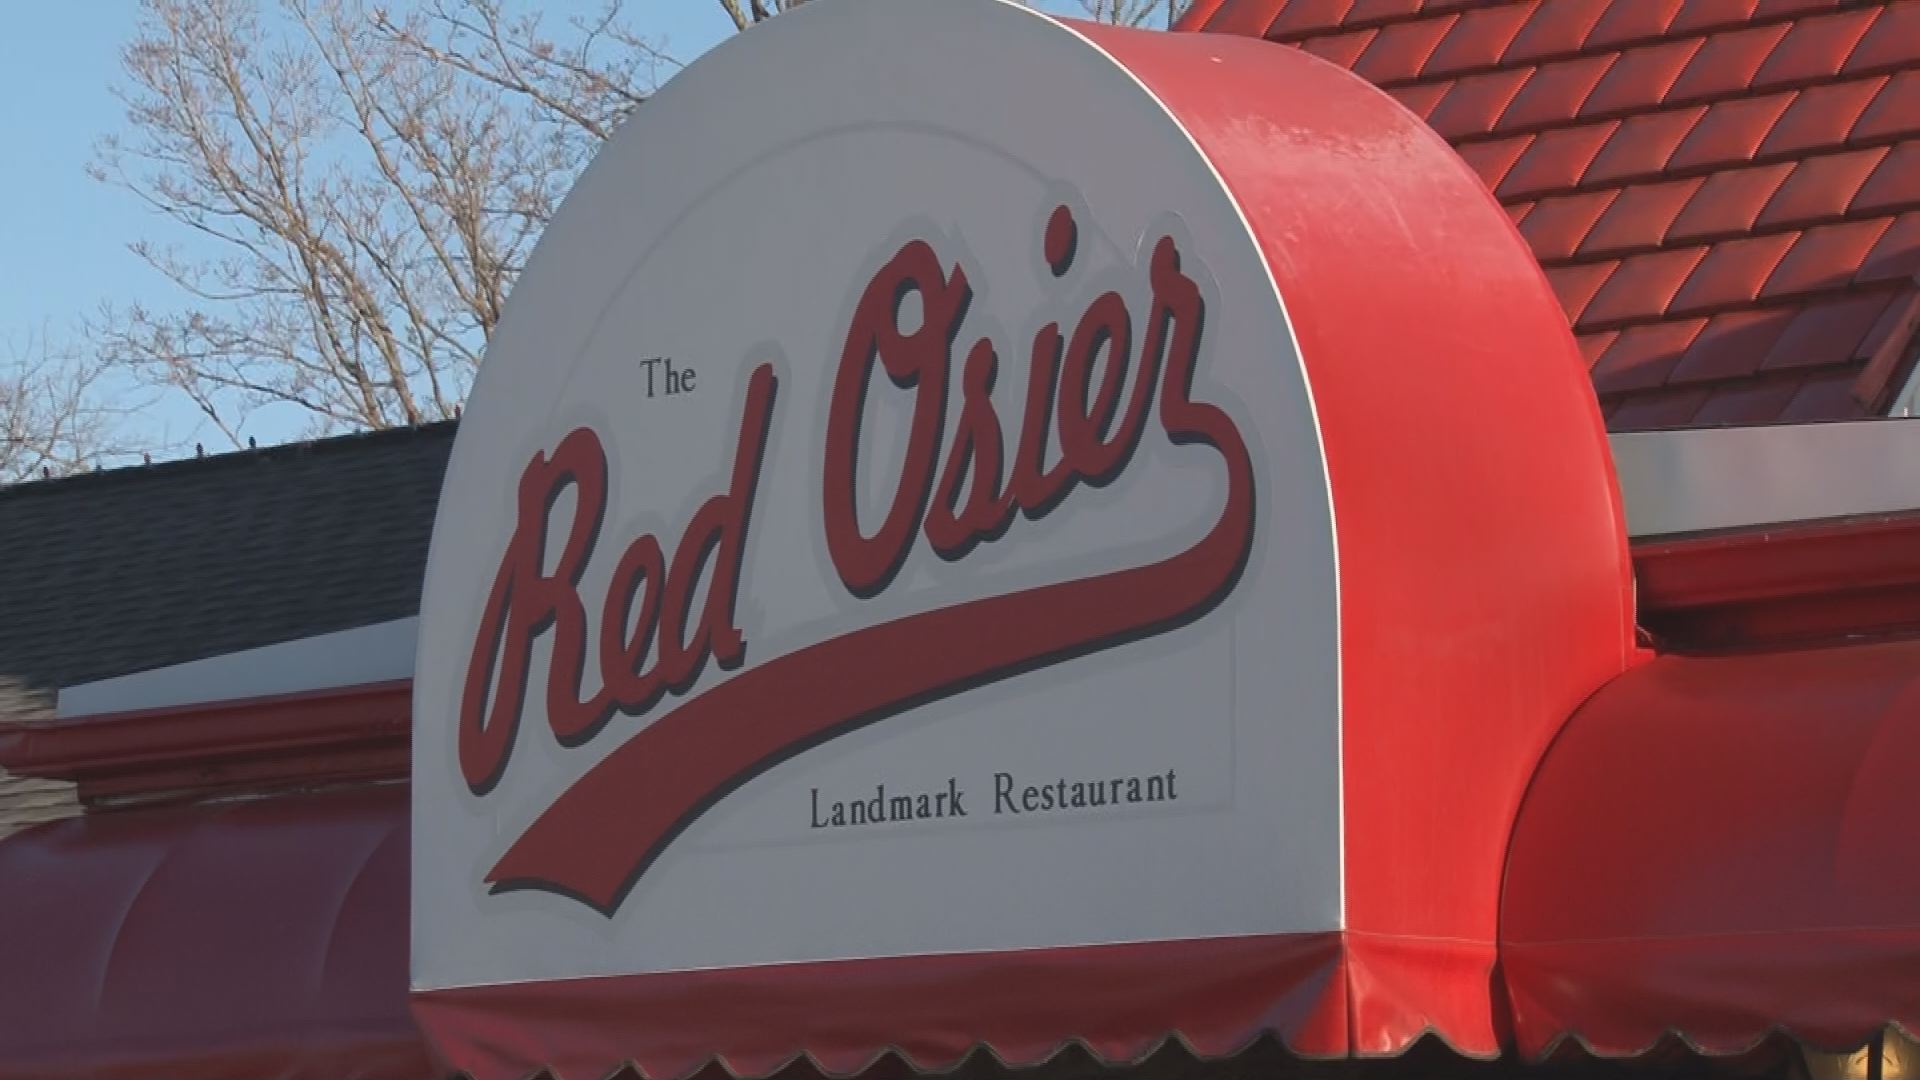 red-osier-restaurant-in-stafford-sold-to-employees-wgrz